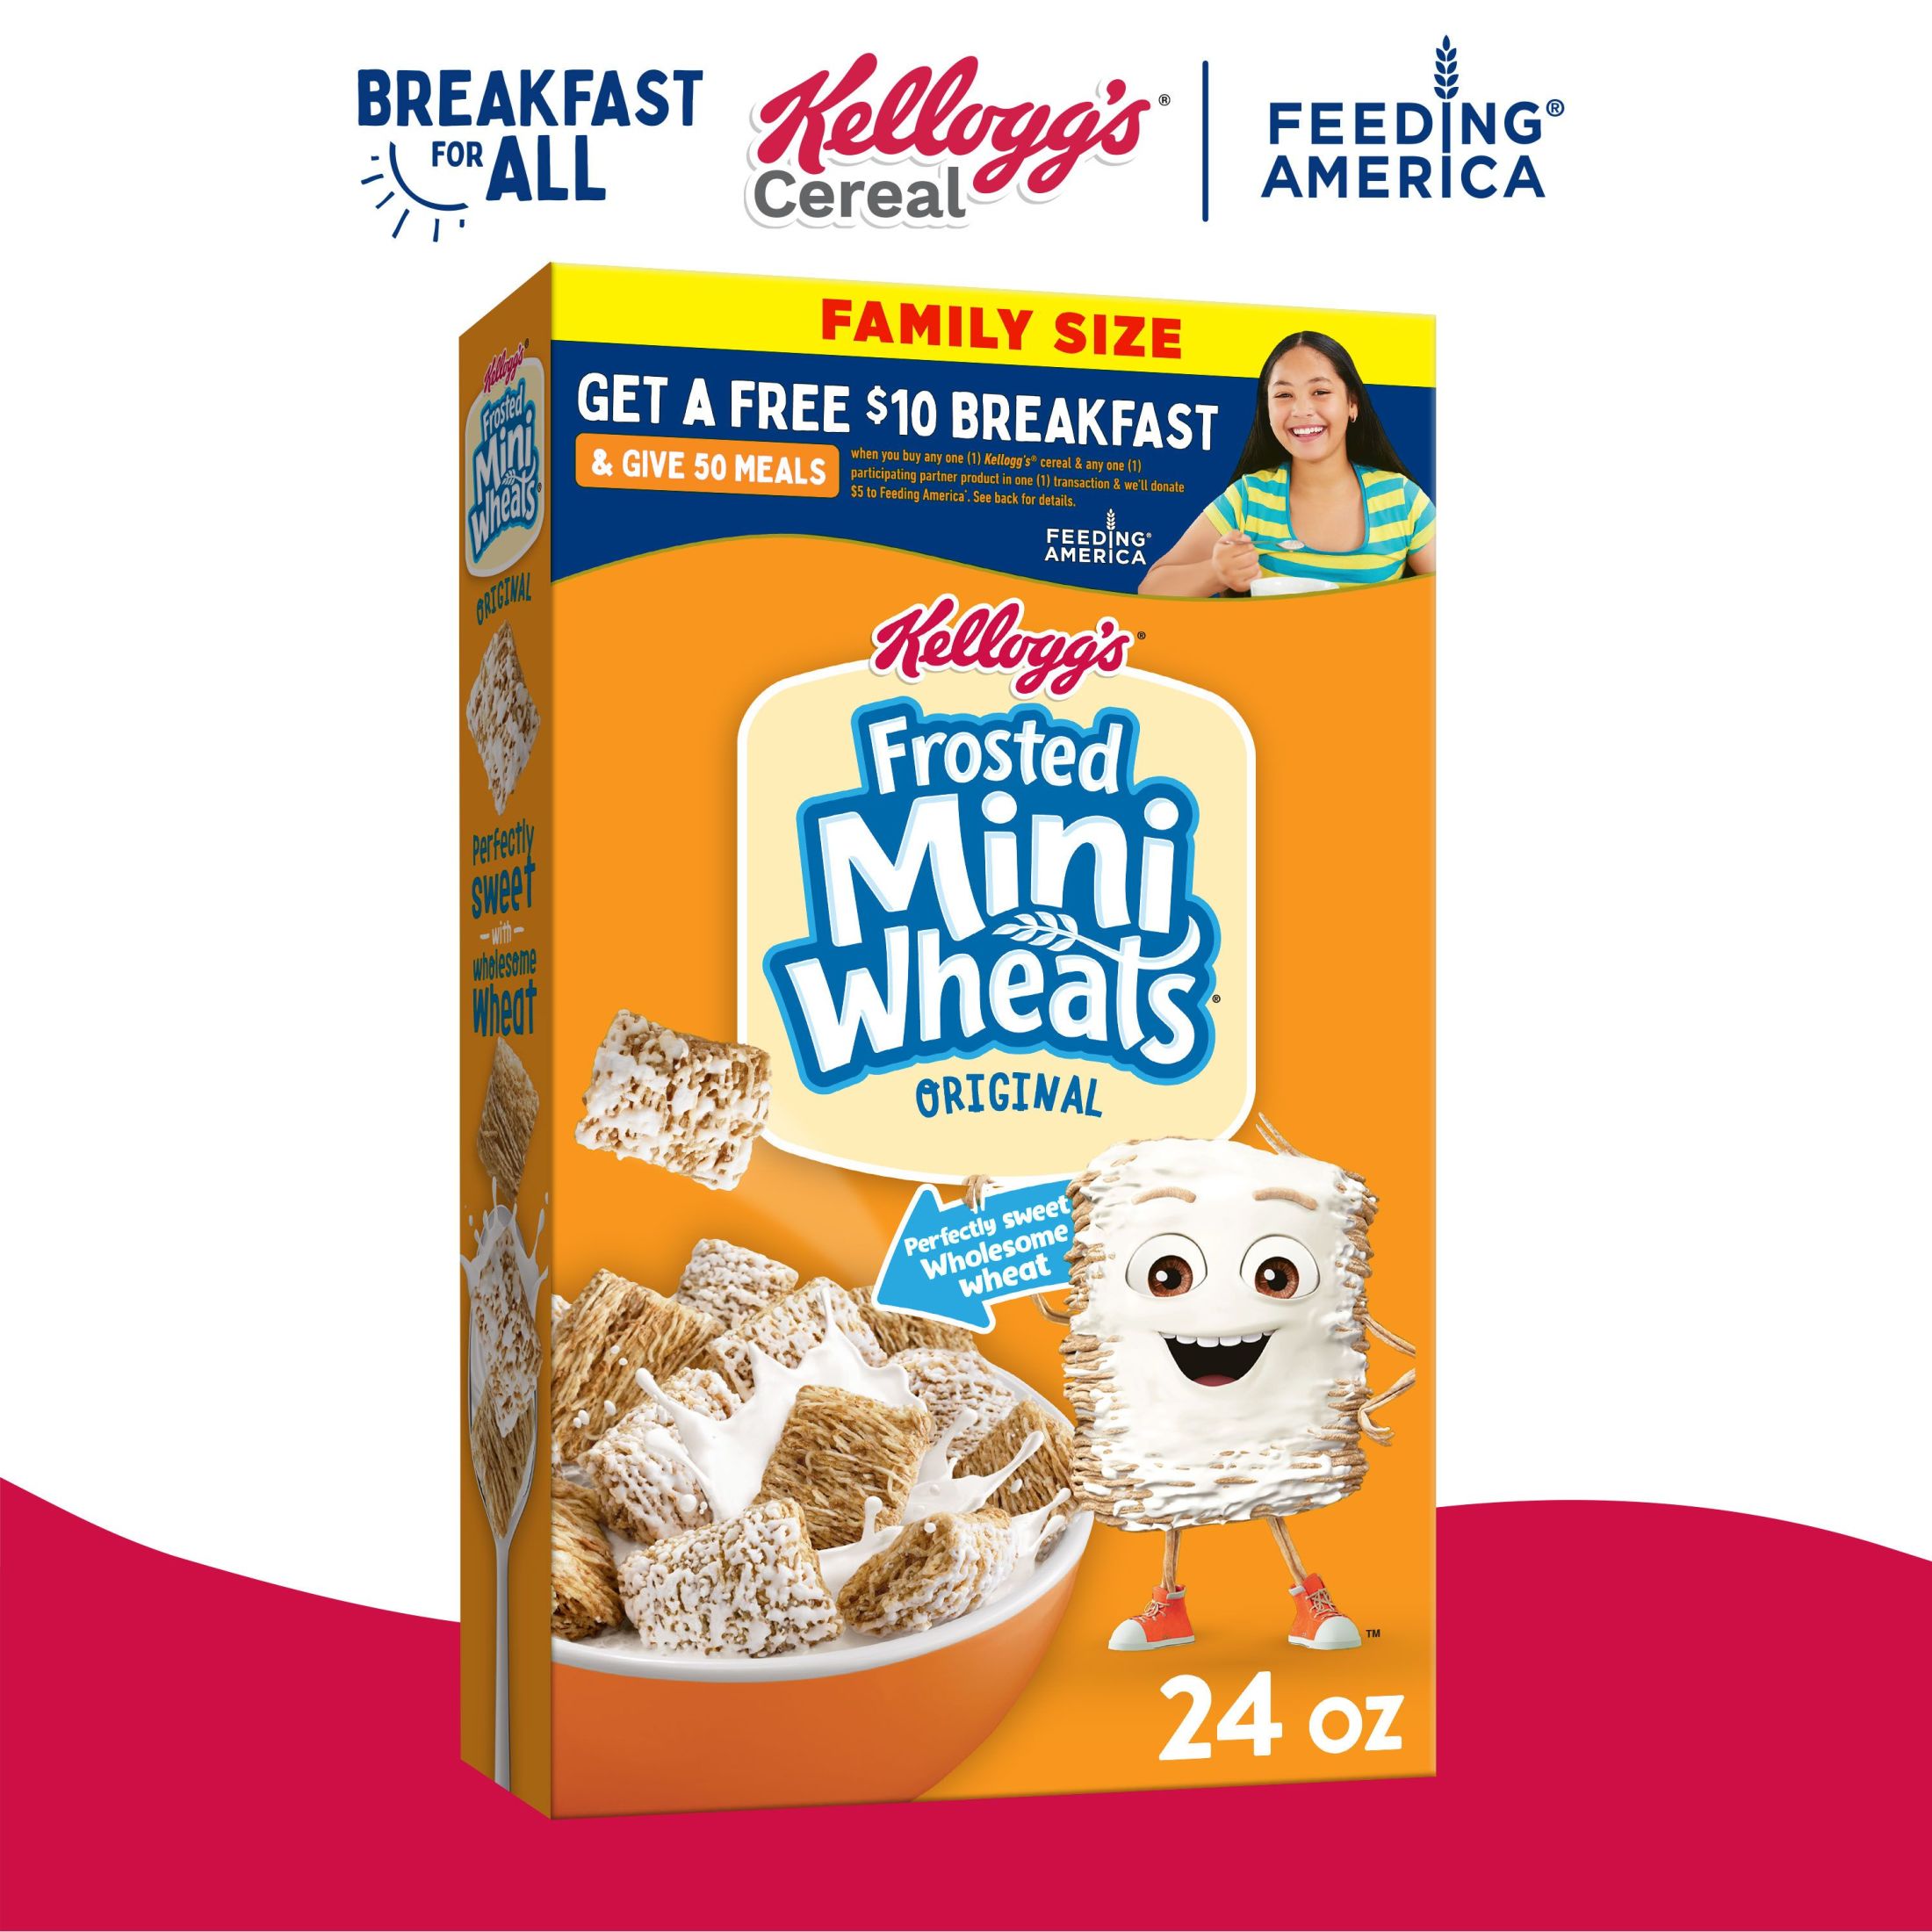 Kellogg's Frosted Mini-Wheats Original Breakfast Cereal, Family Size, 24 oz Box - image 1 of 13